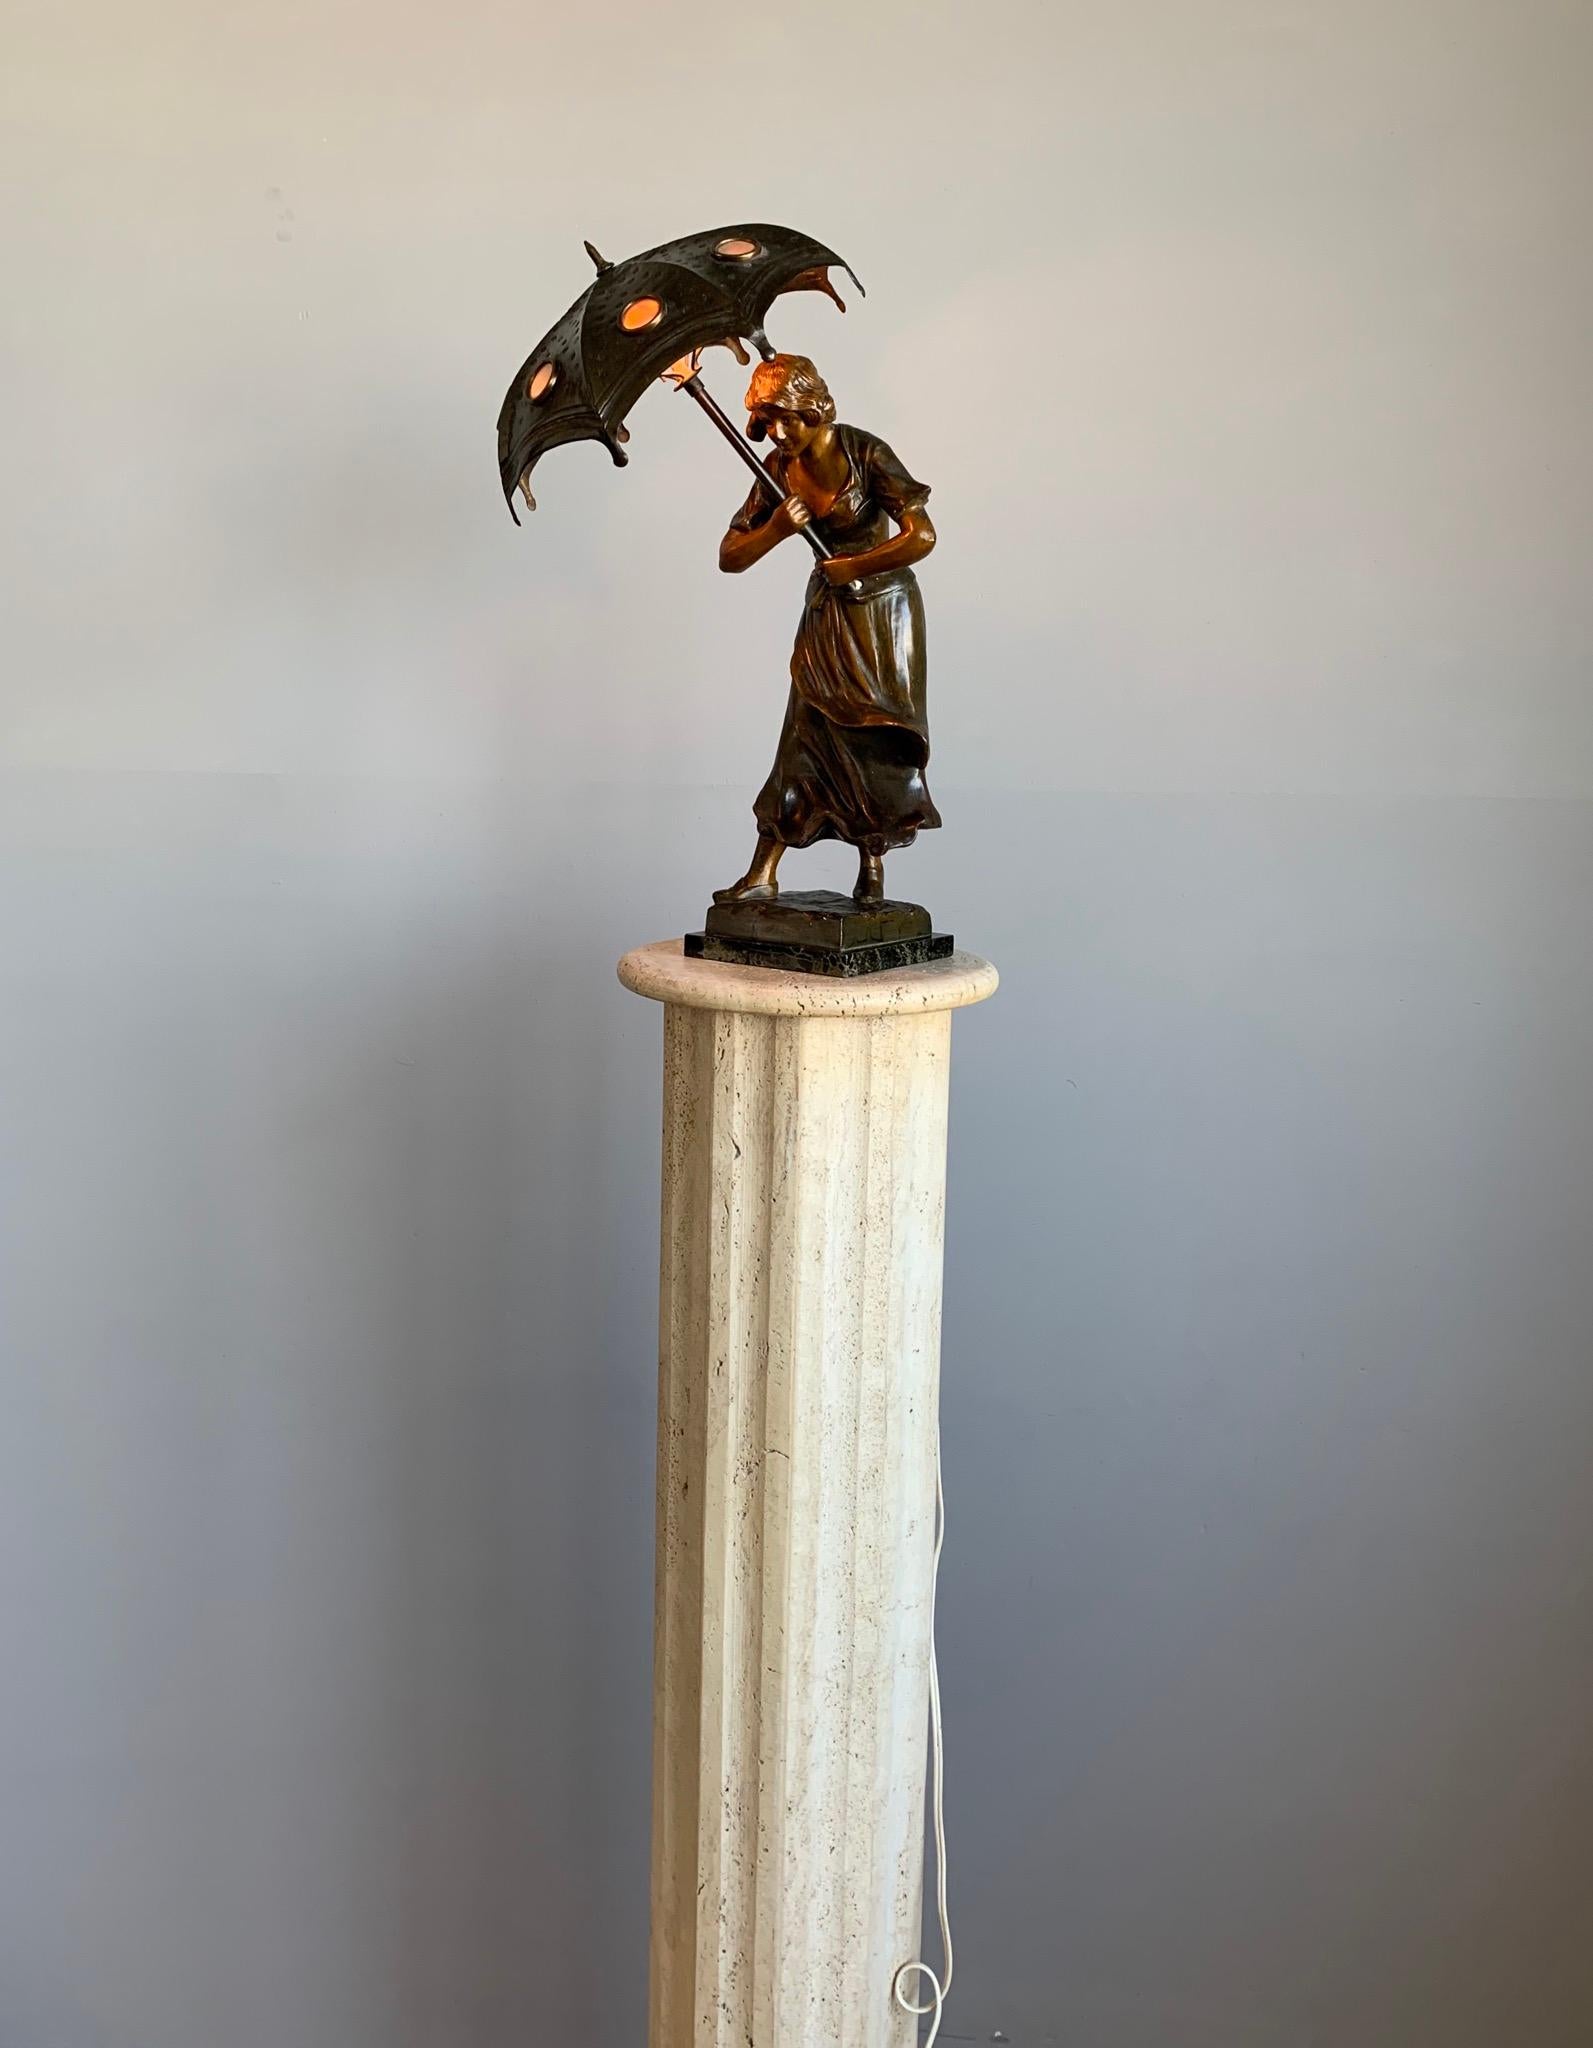 Hand-Crafted Stunning Art Deco Sculpture Desk or Table Lamp, Girl with Umbrella in the Wind